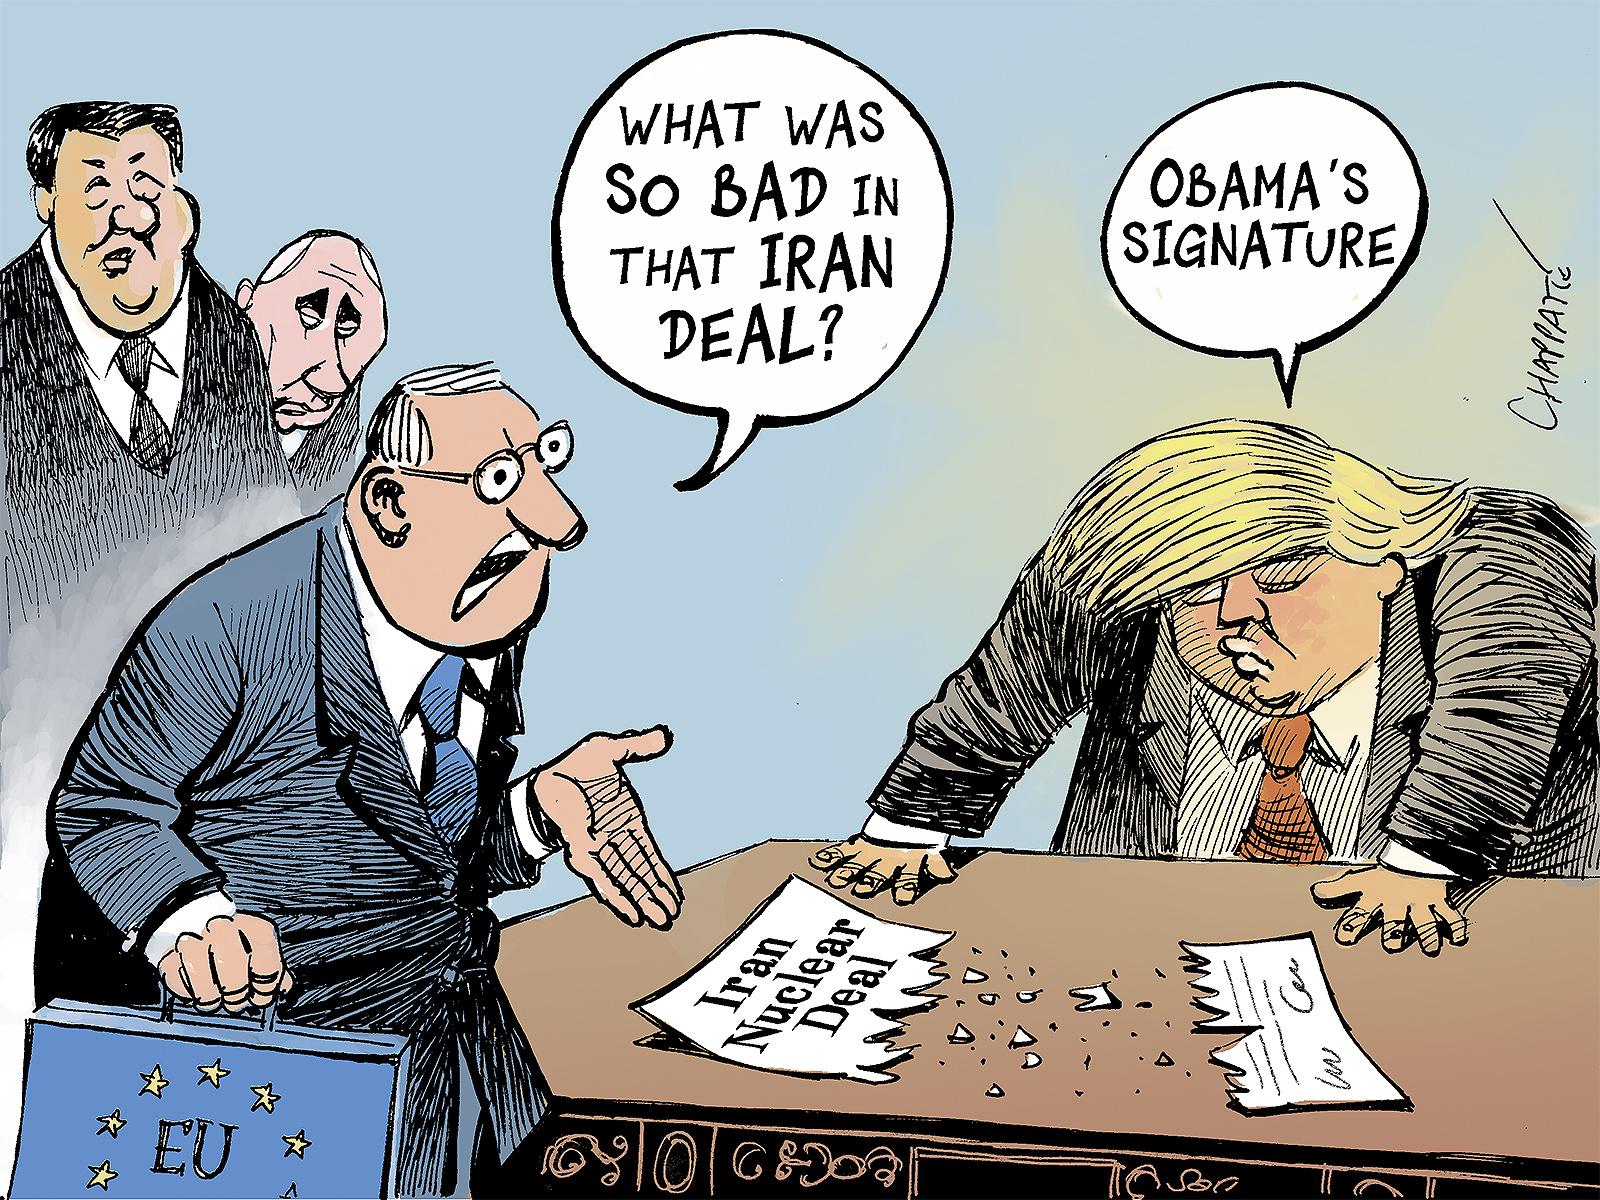 Why Trump hated the Iran deal